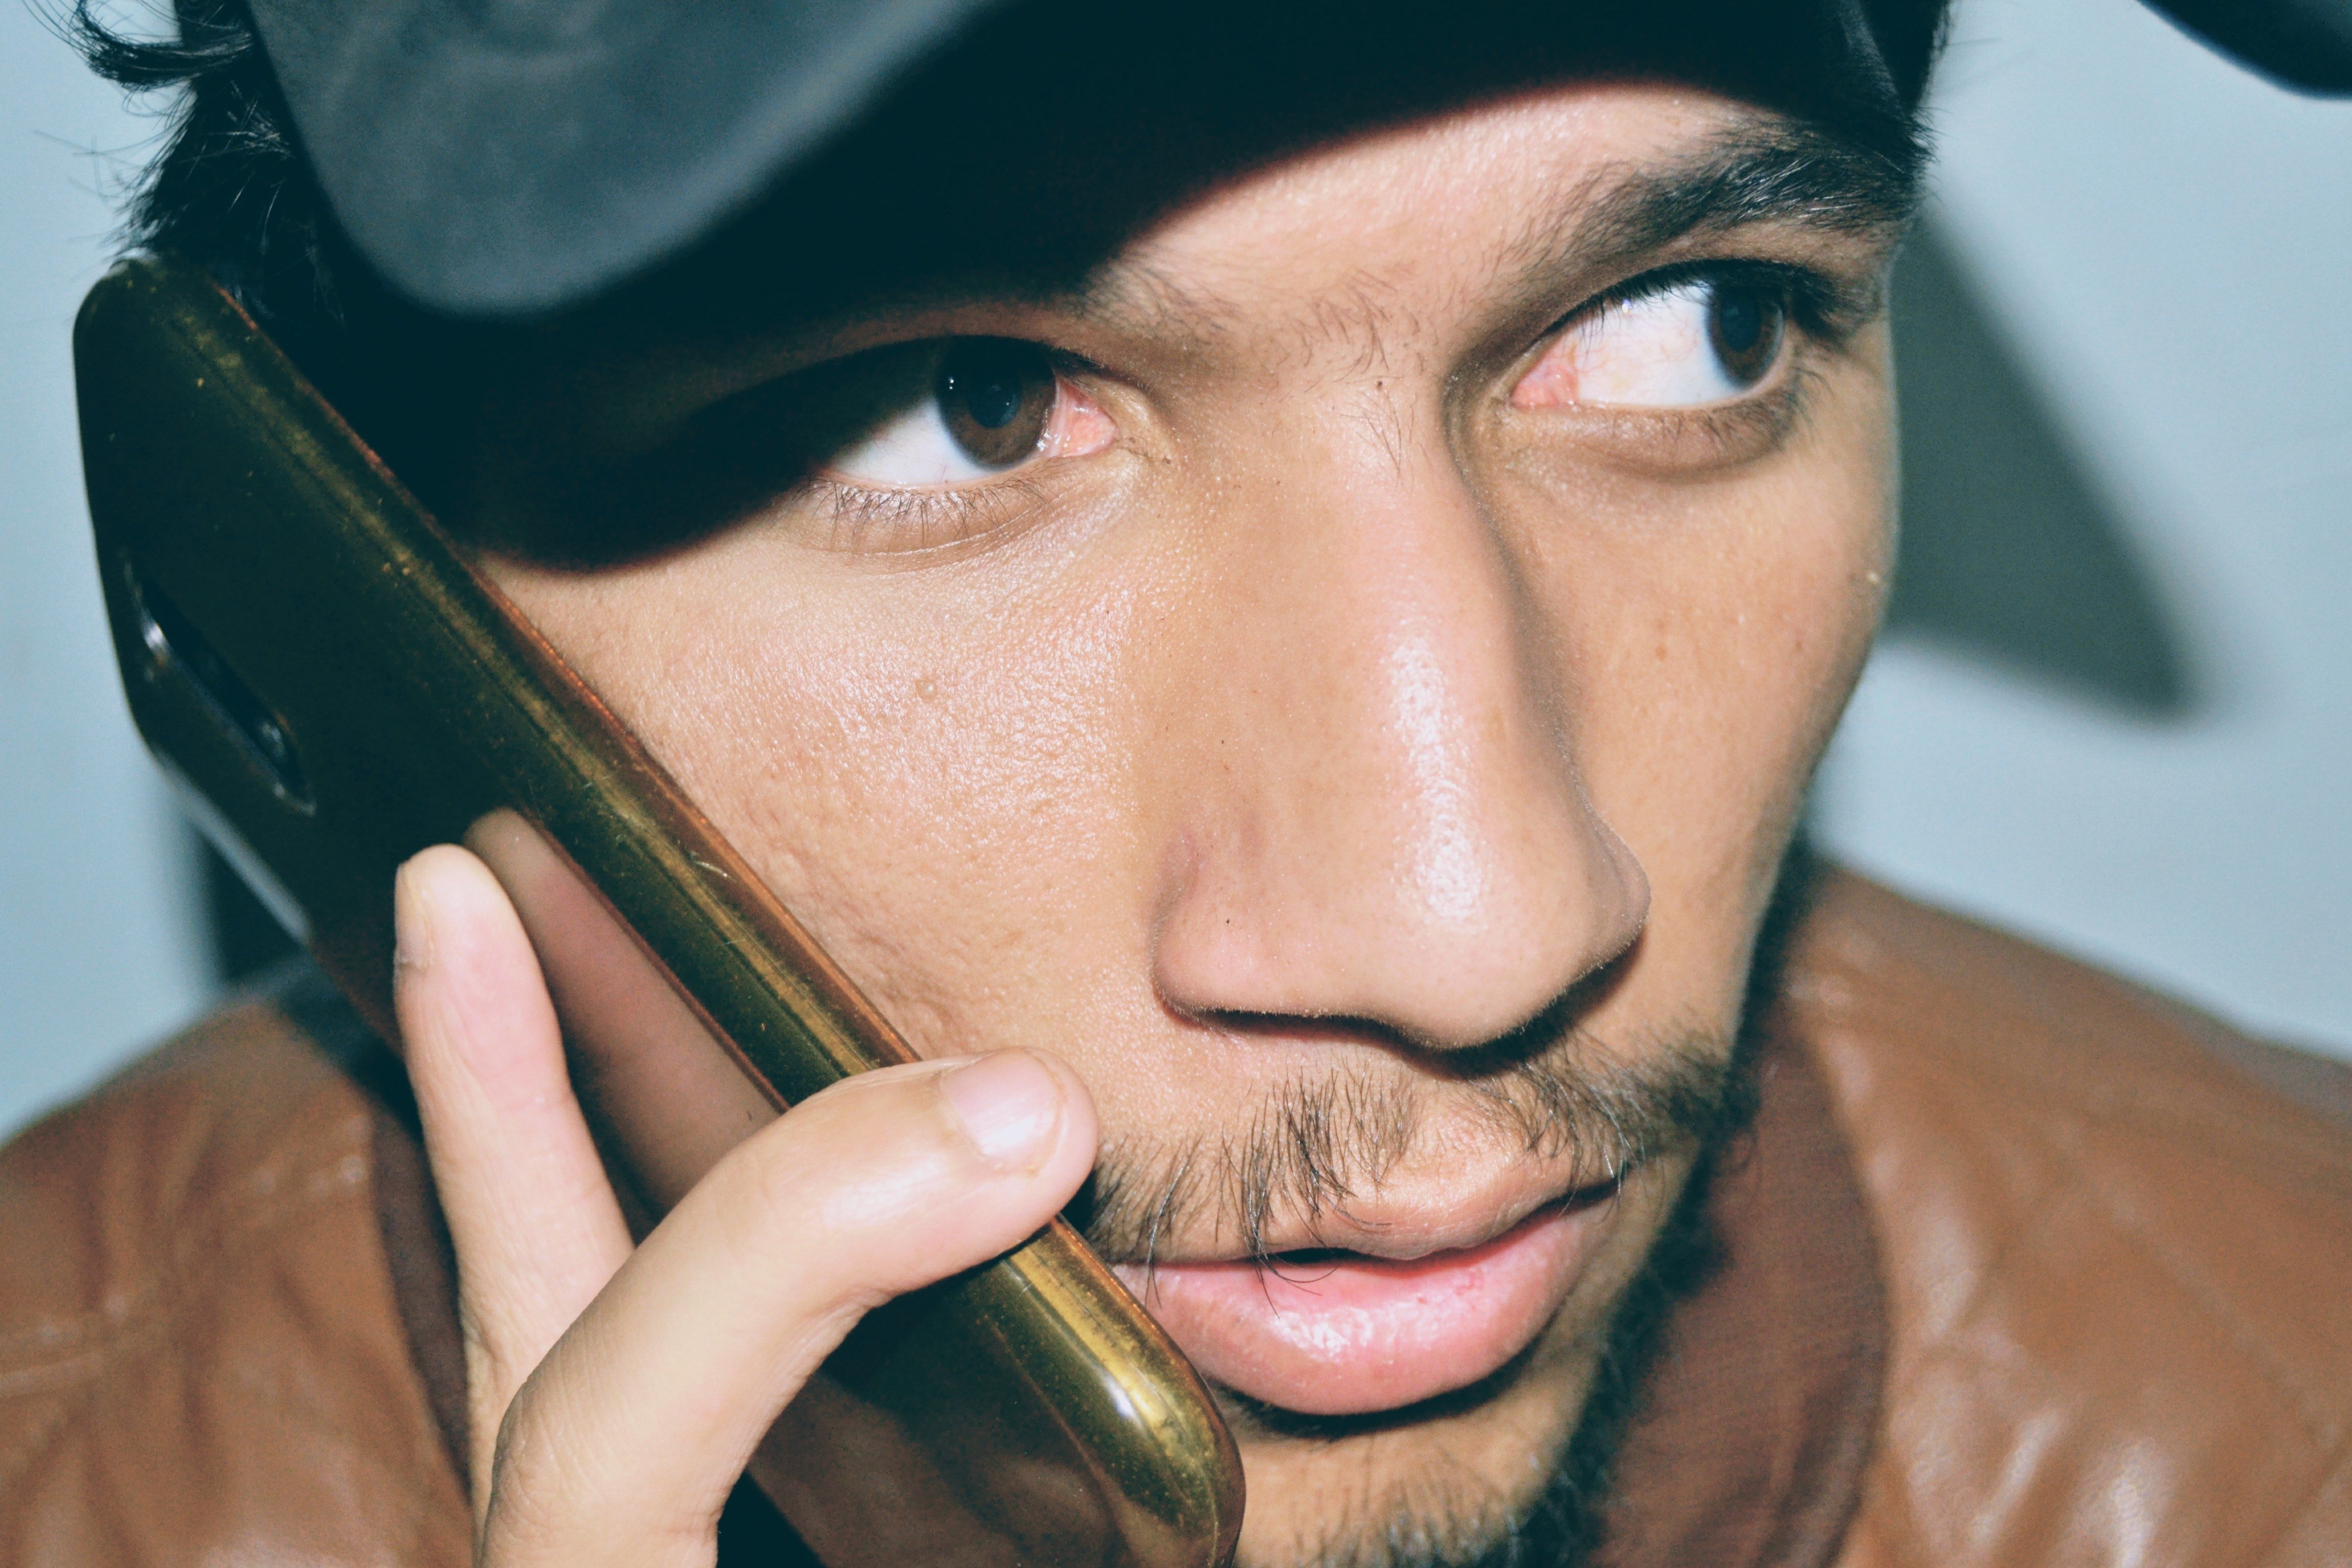 Man in a brown leather jacket talking on phone | Photo: Pexels